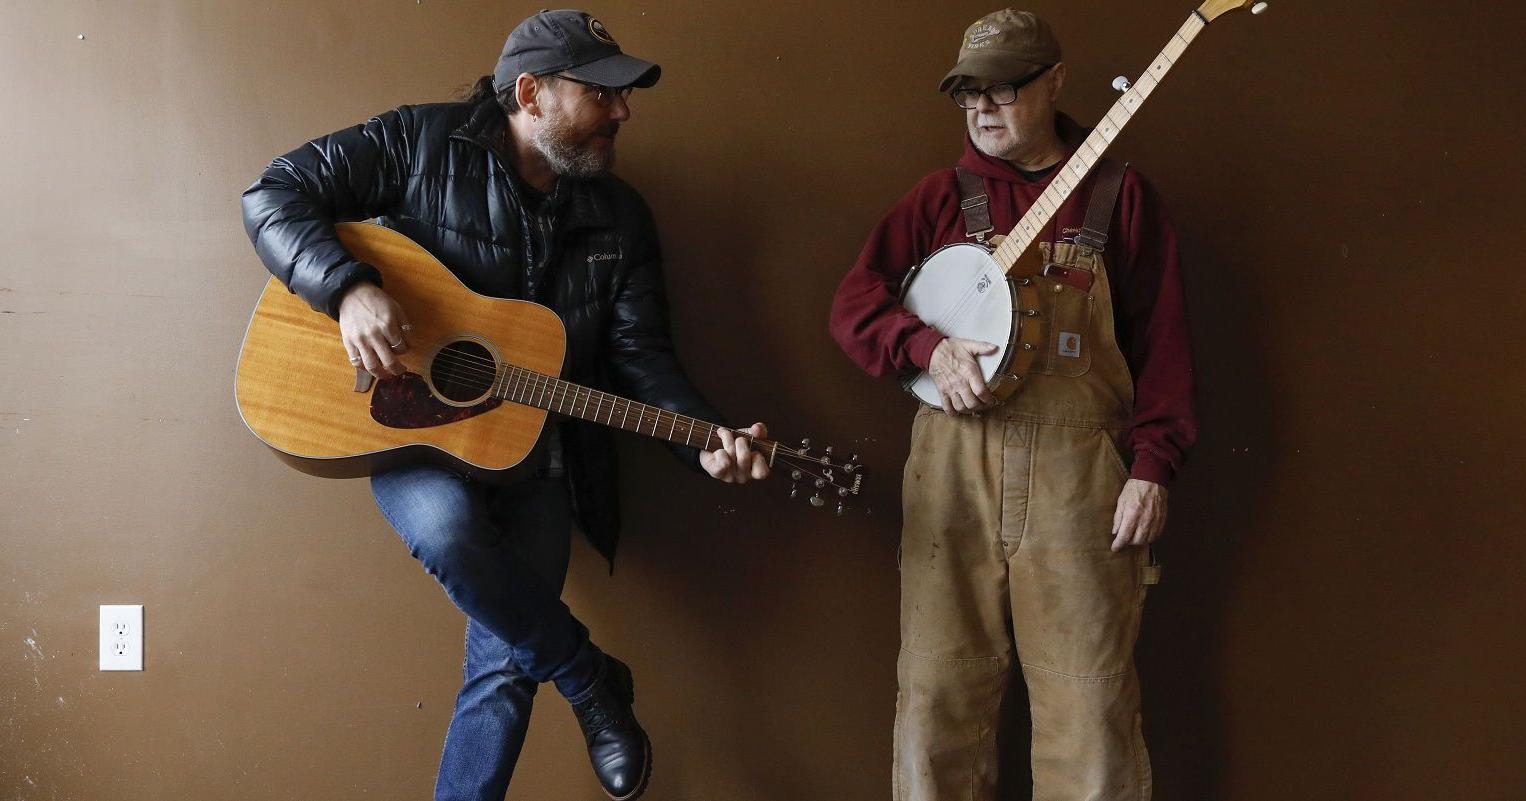 Emerging folk music series in Akron, of all places, aims to be 'lighthouse for us all'